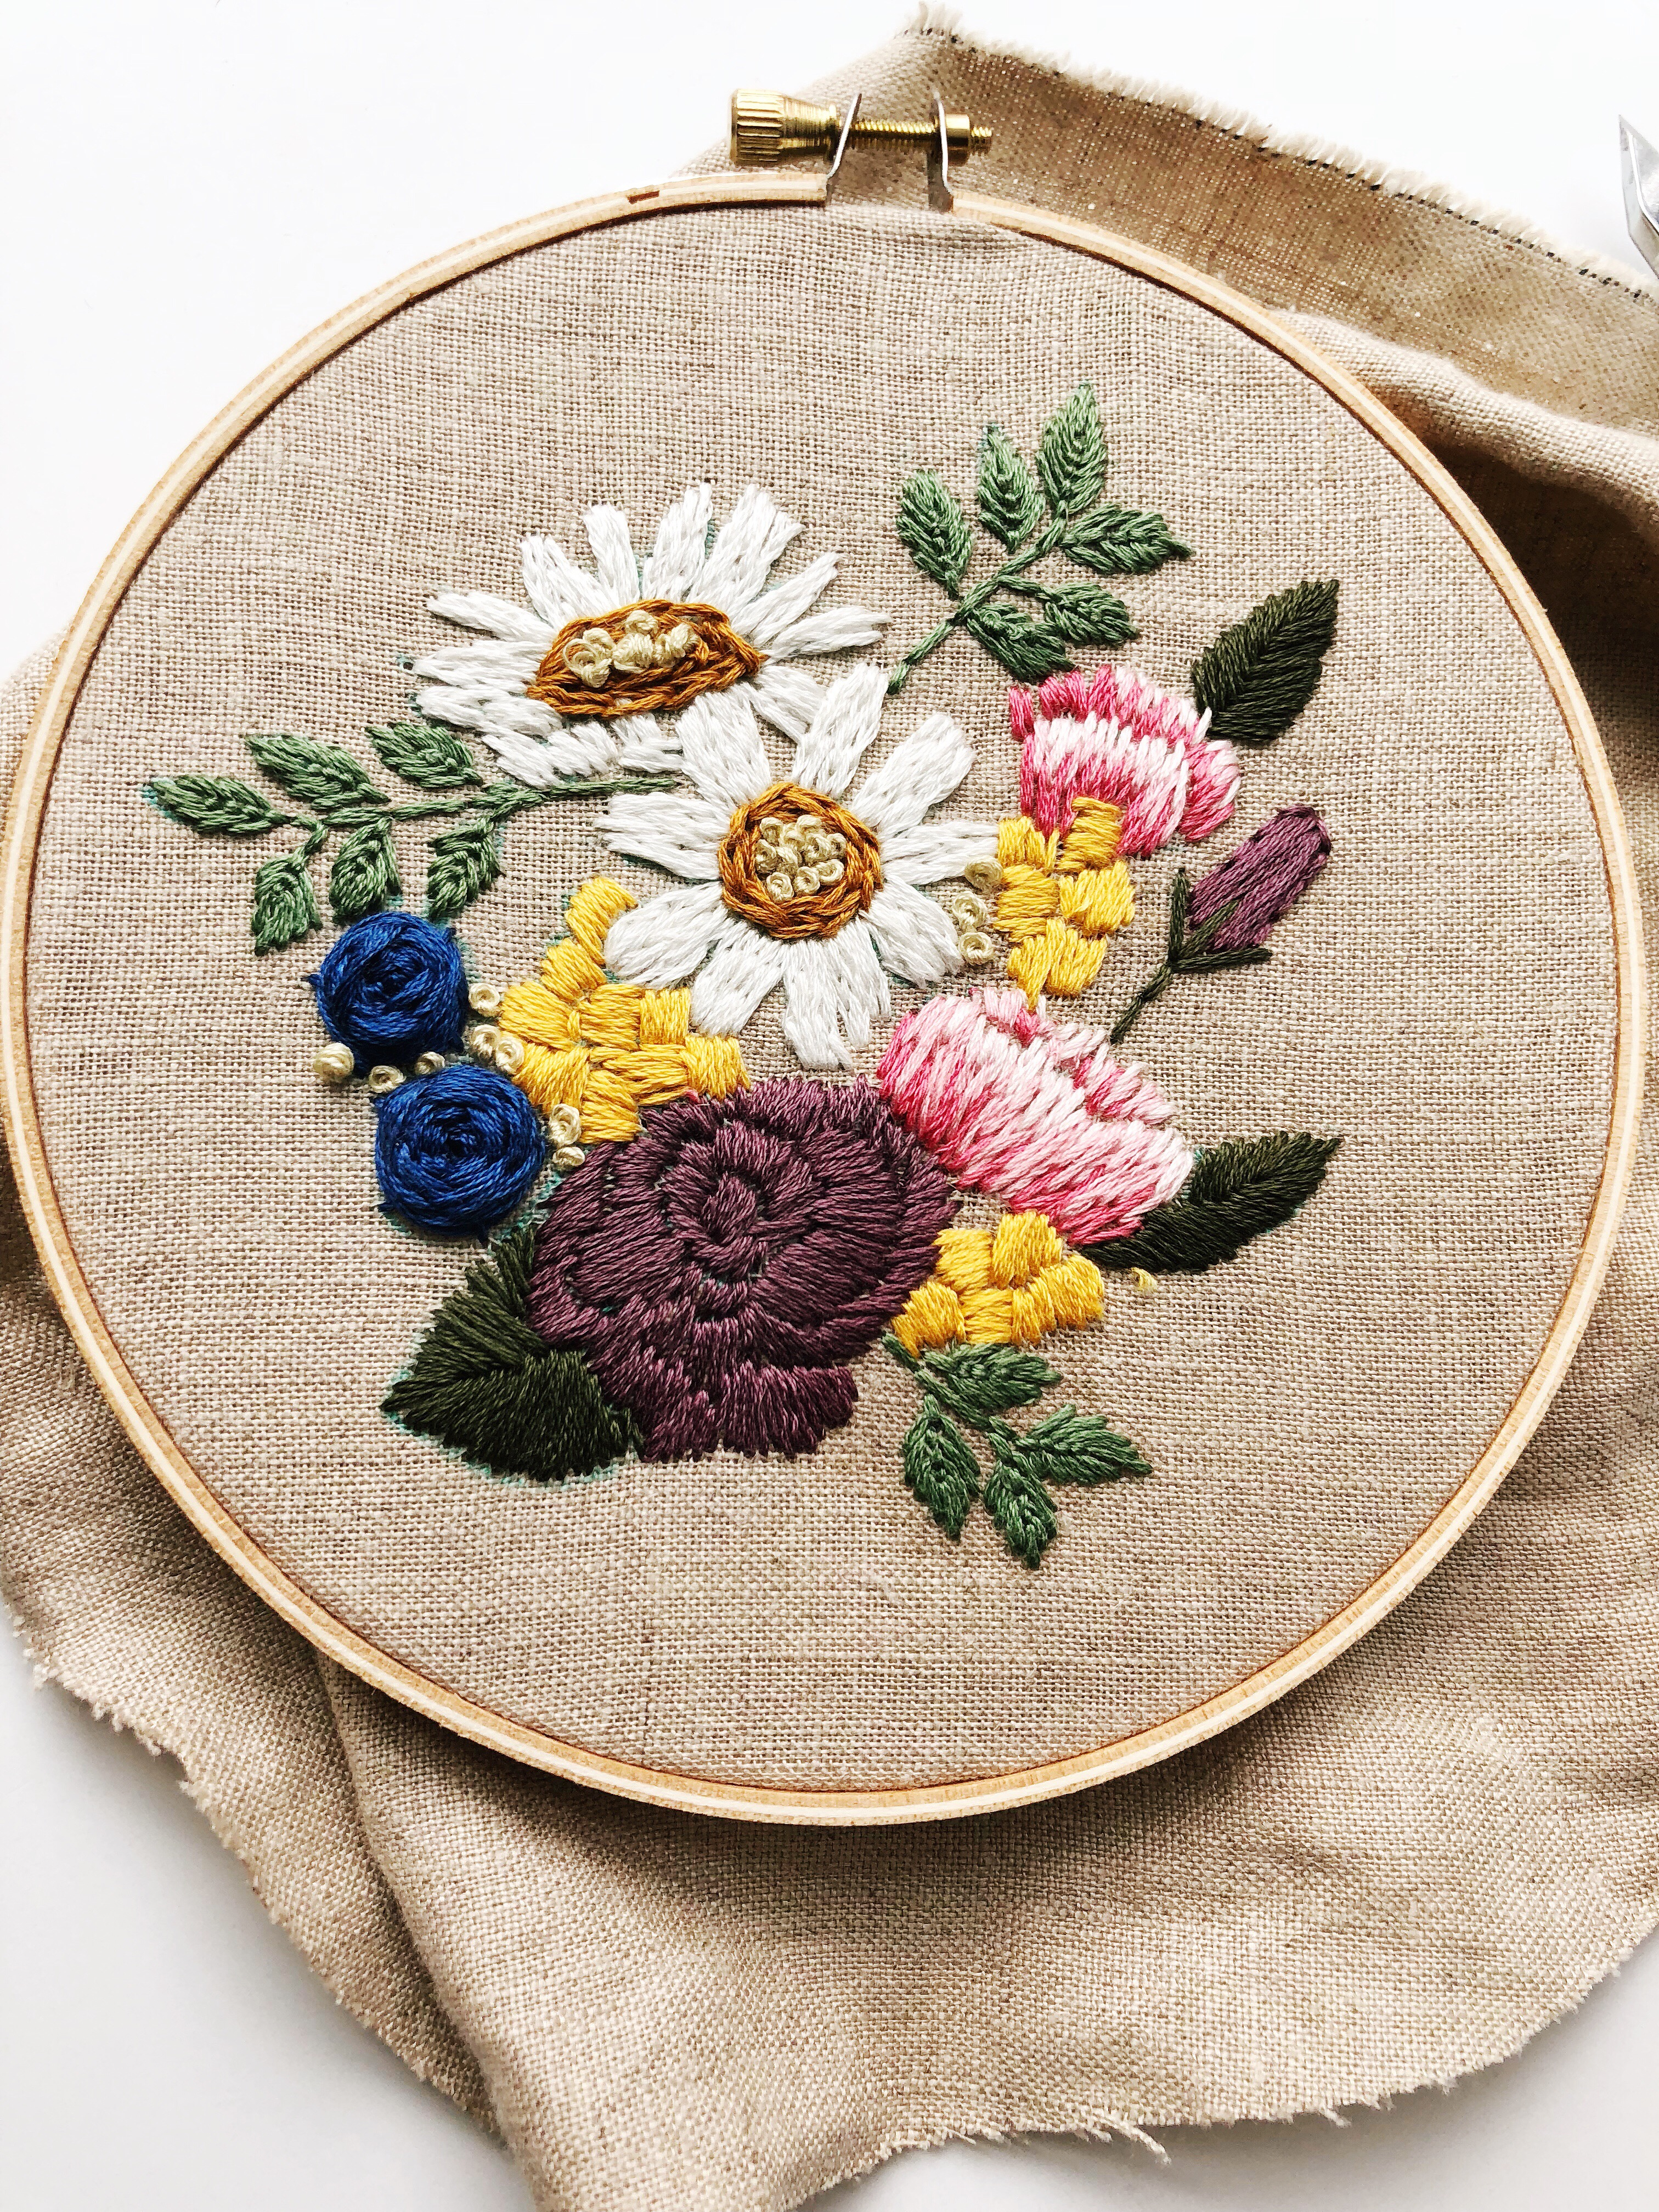 Embroidery Patterns Pdf Flower Bouquet Embroidery Pattern